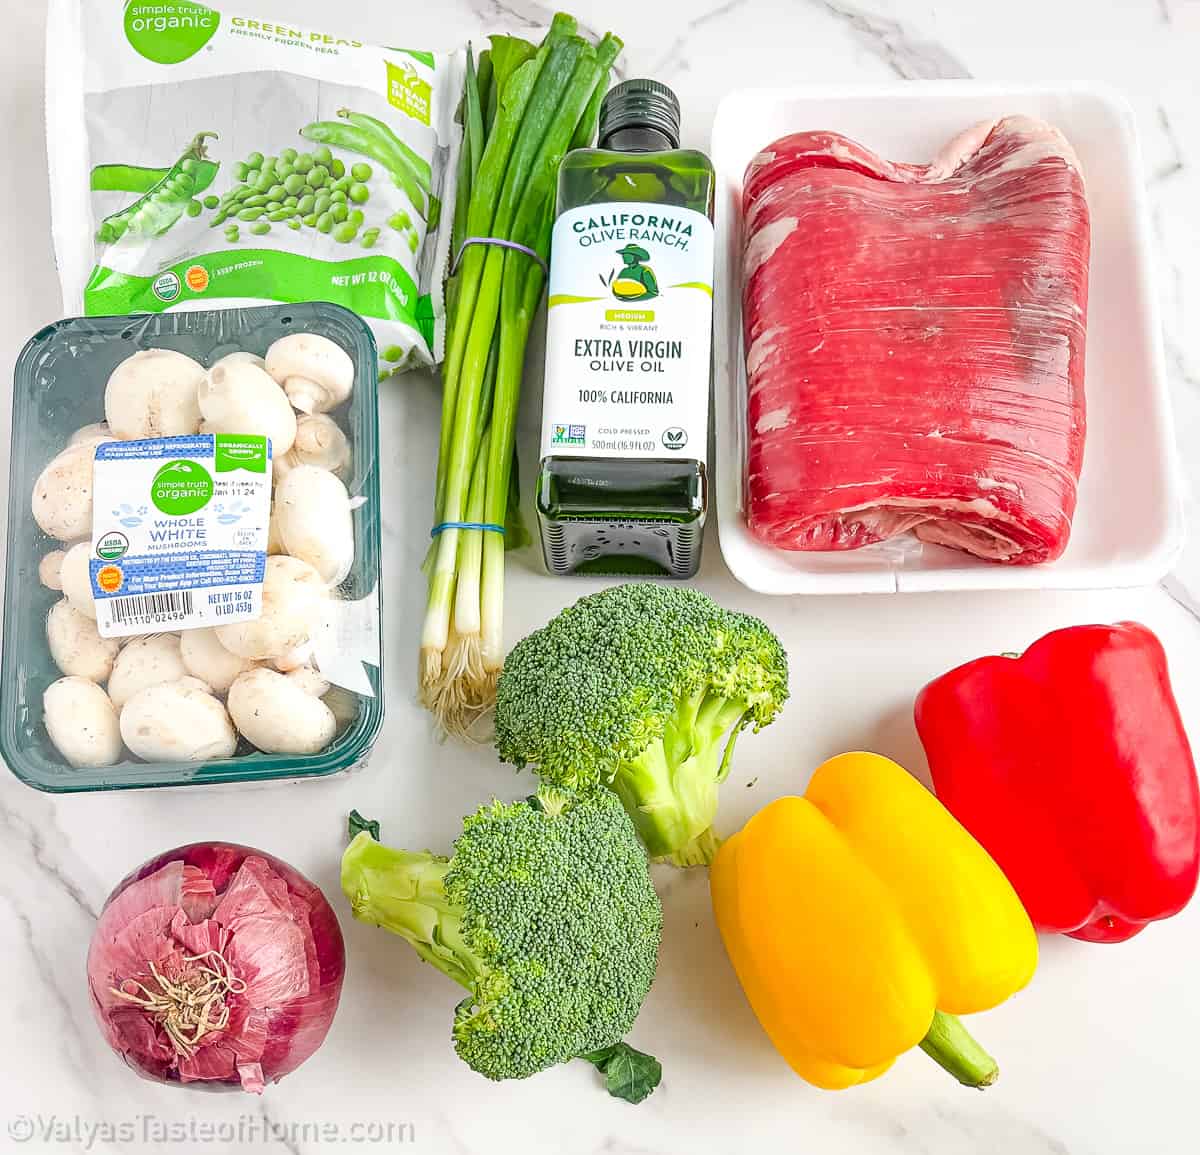 All you need are some simple pantry staple ingredients to make this beef stir fry recipe at home. 